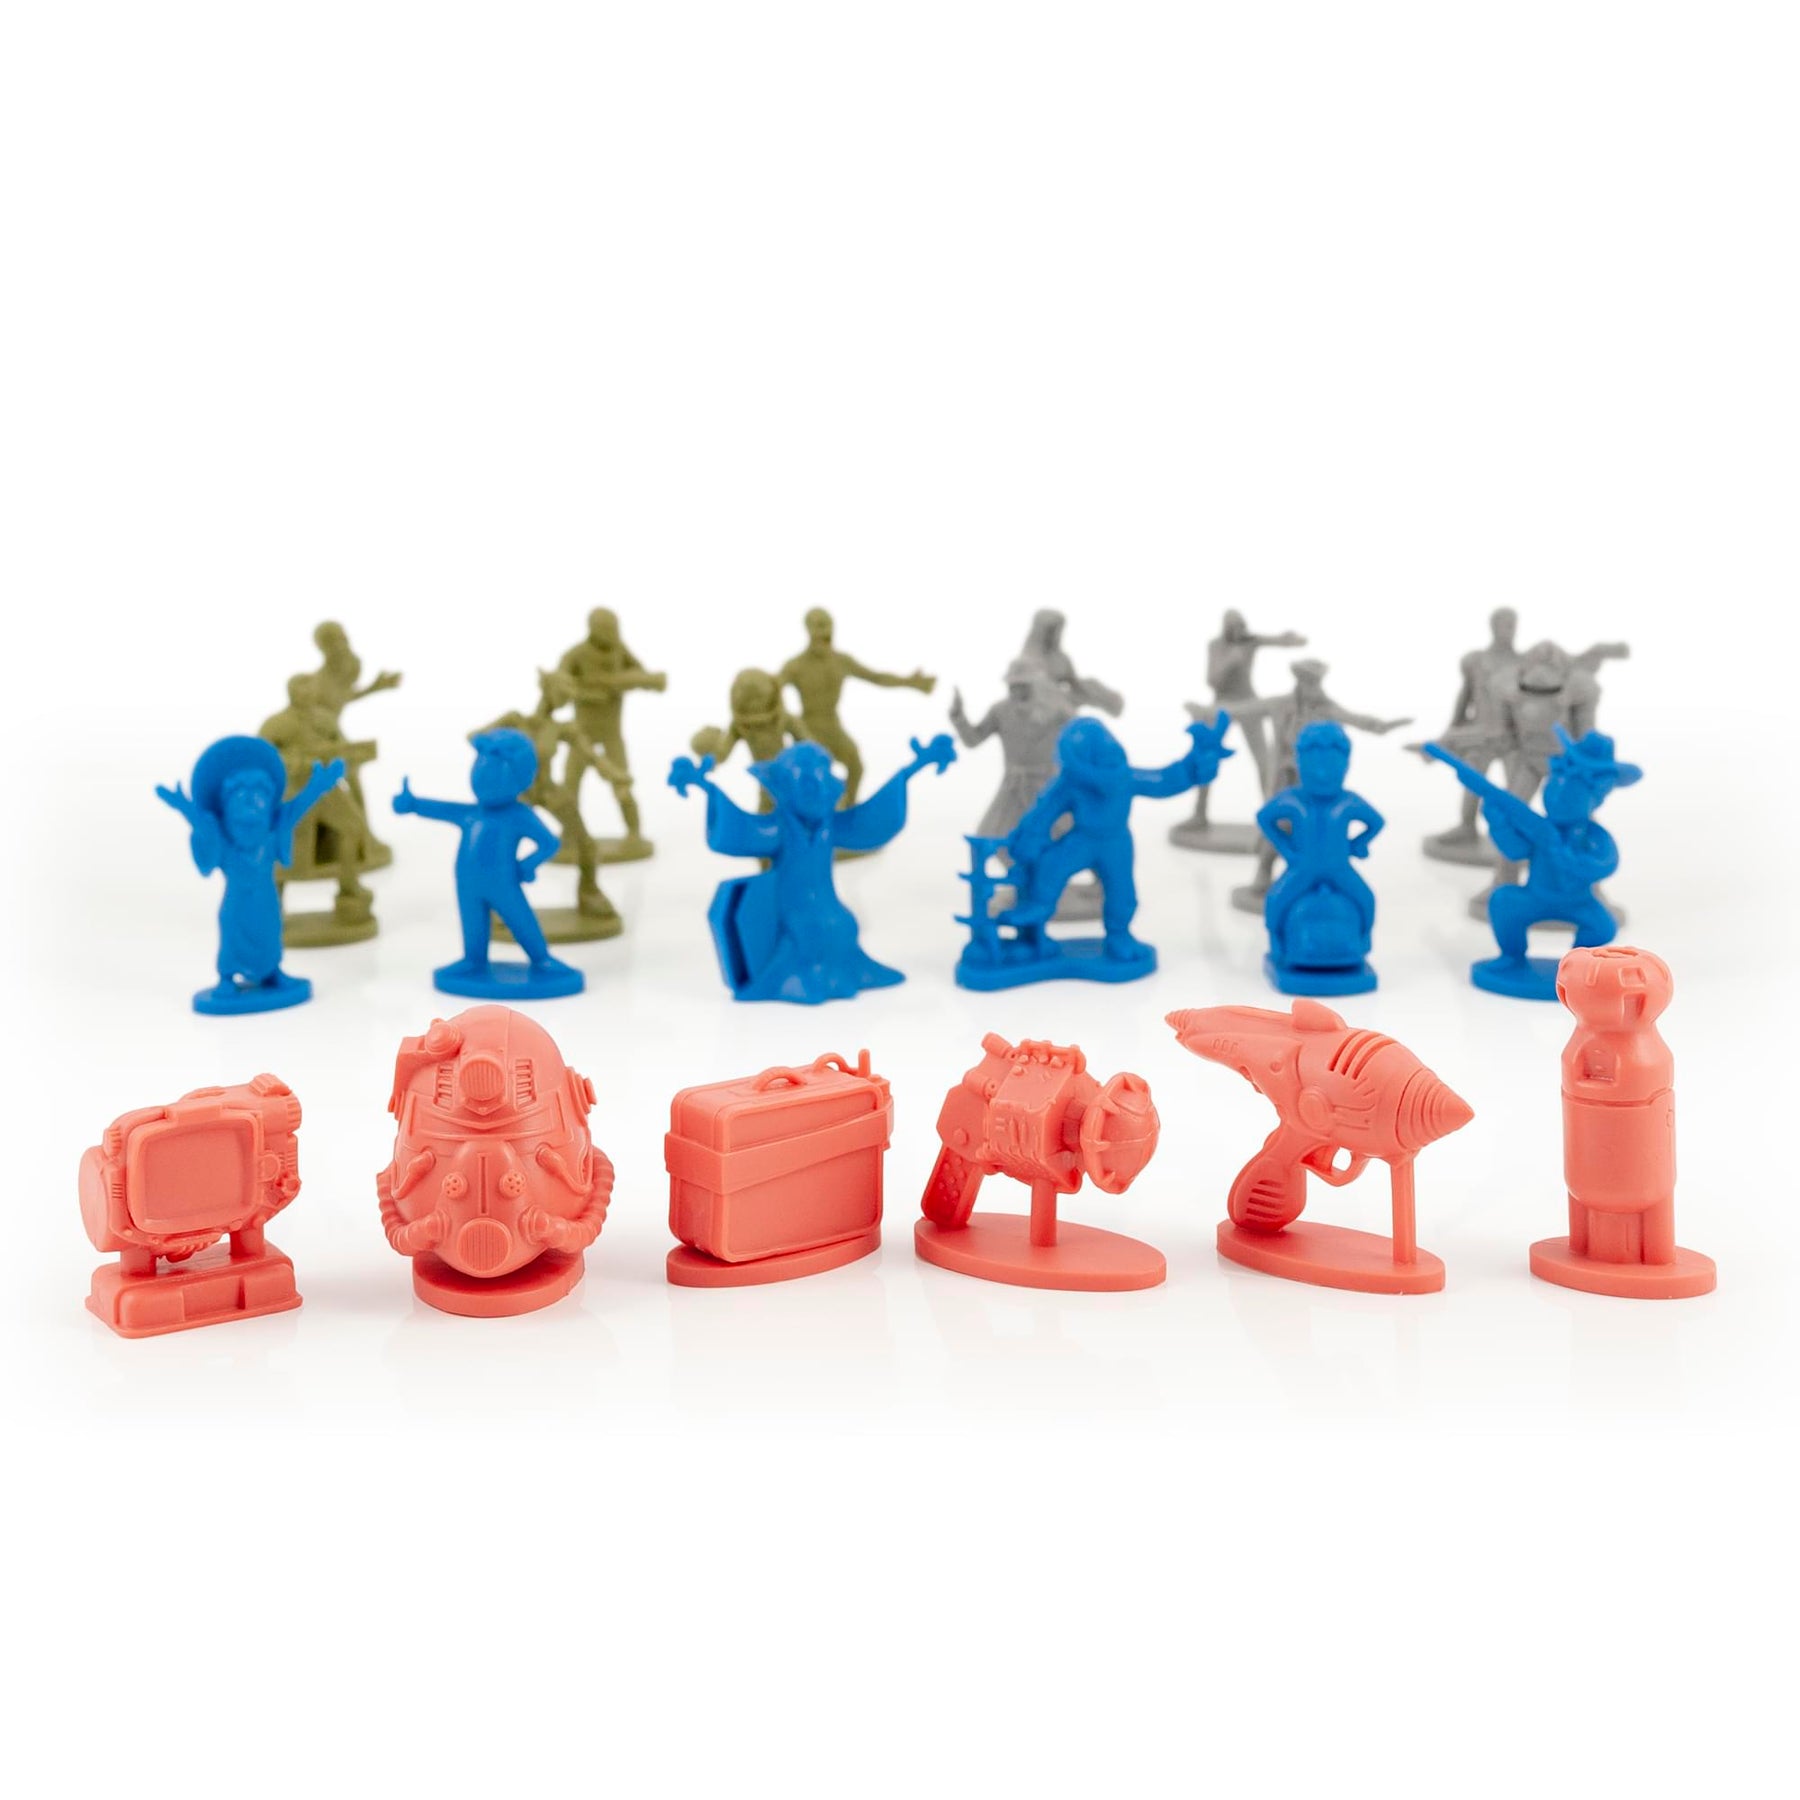 Fallout Nanoforce Series 1 Army Builder Figure Collection - Bagged Set 2